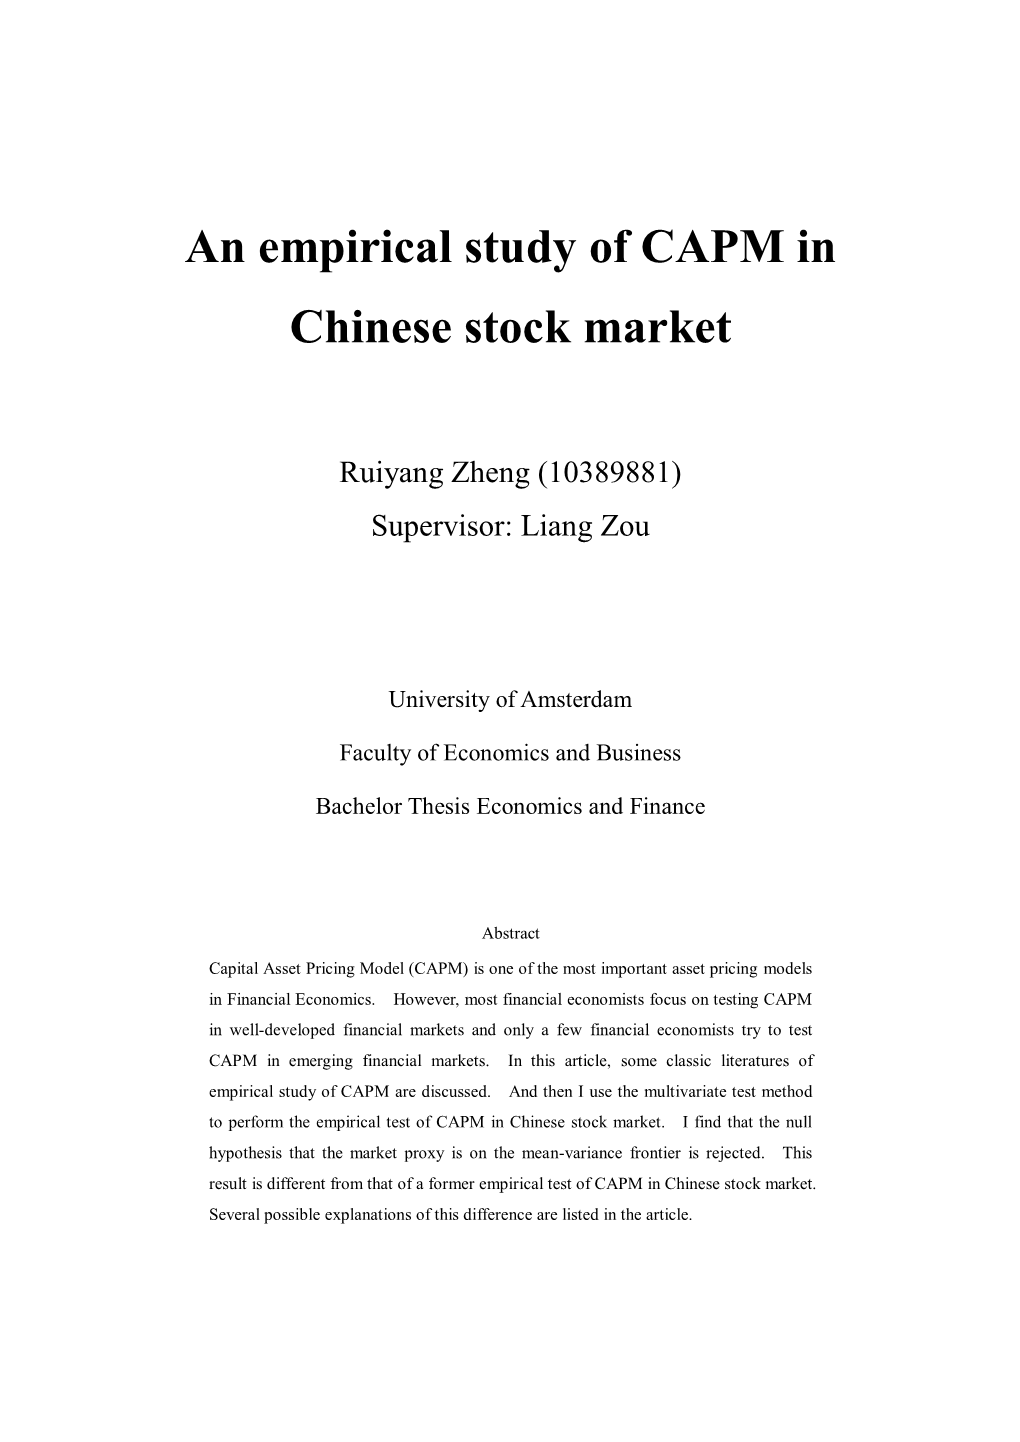 An Empirical Study of CAPM in Chinese Stock Market